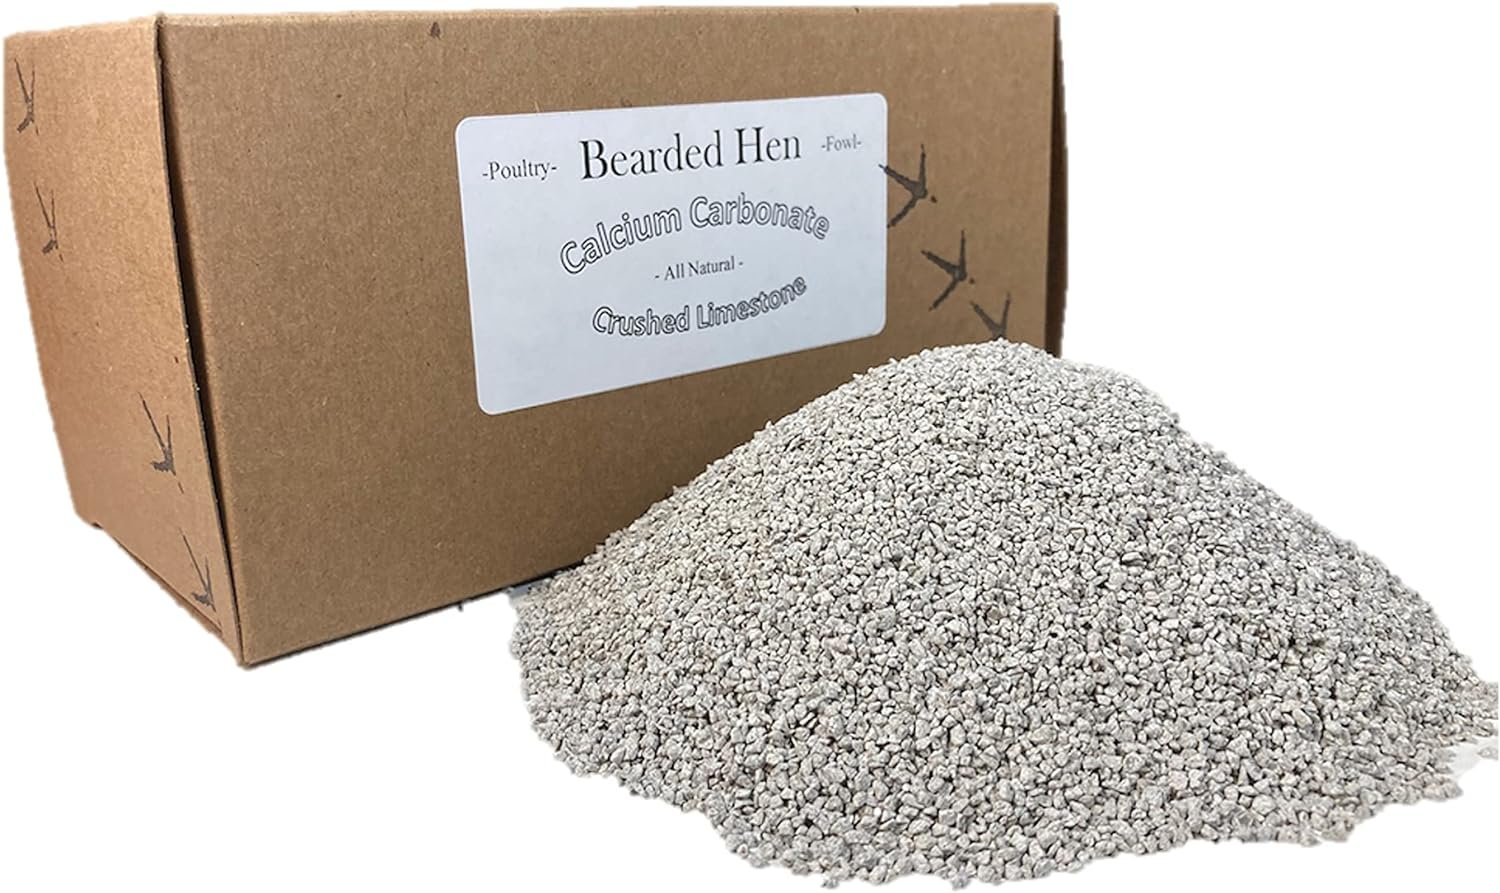 Bearded Hen - Poultry Fowl Calcium Carbonate - All Natural Crushed Limestone - Wild Turkey, Game Bird, Egg Laying Hen, Duck, Chicken (3 Pounds)